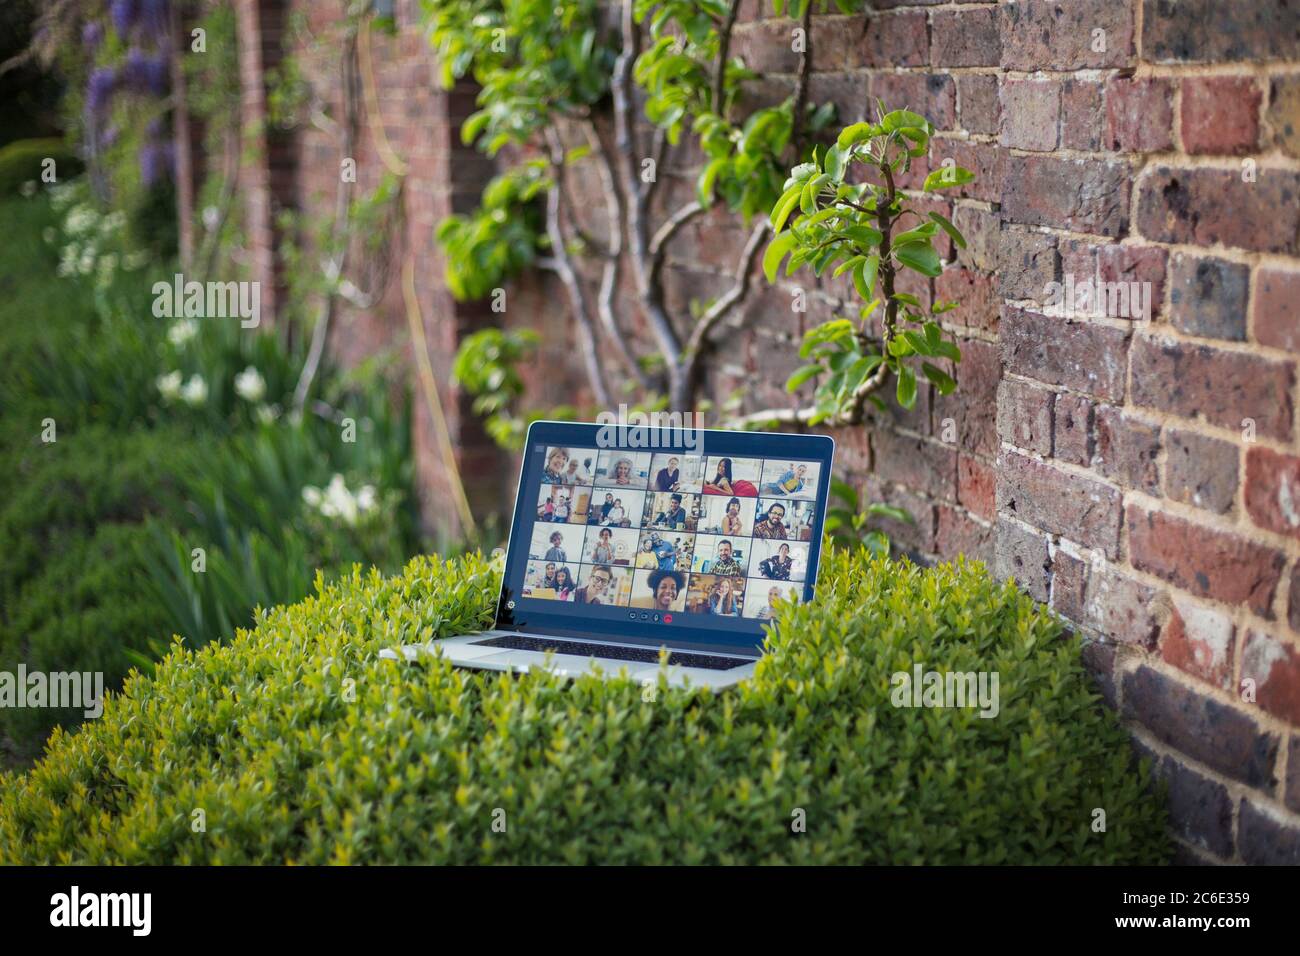 Friends video chatting on laptop screen in garden Stock Photo